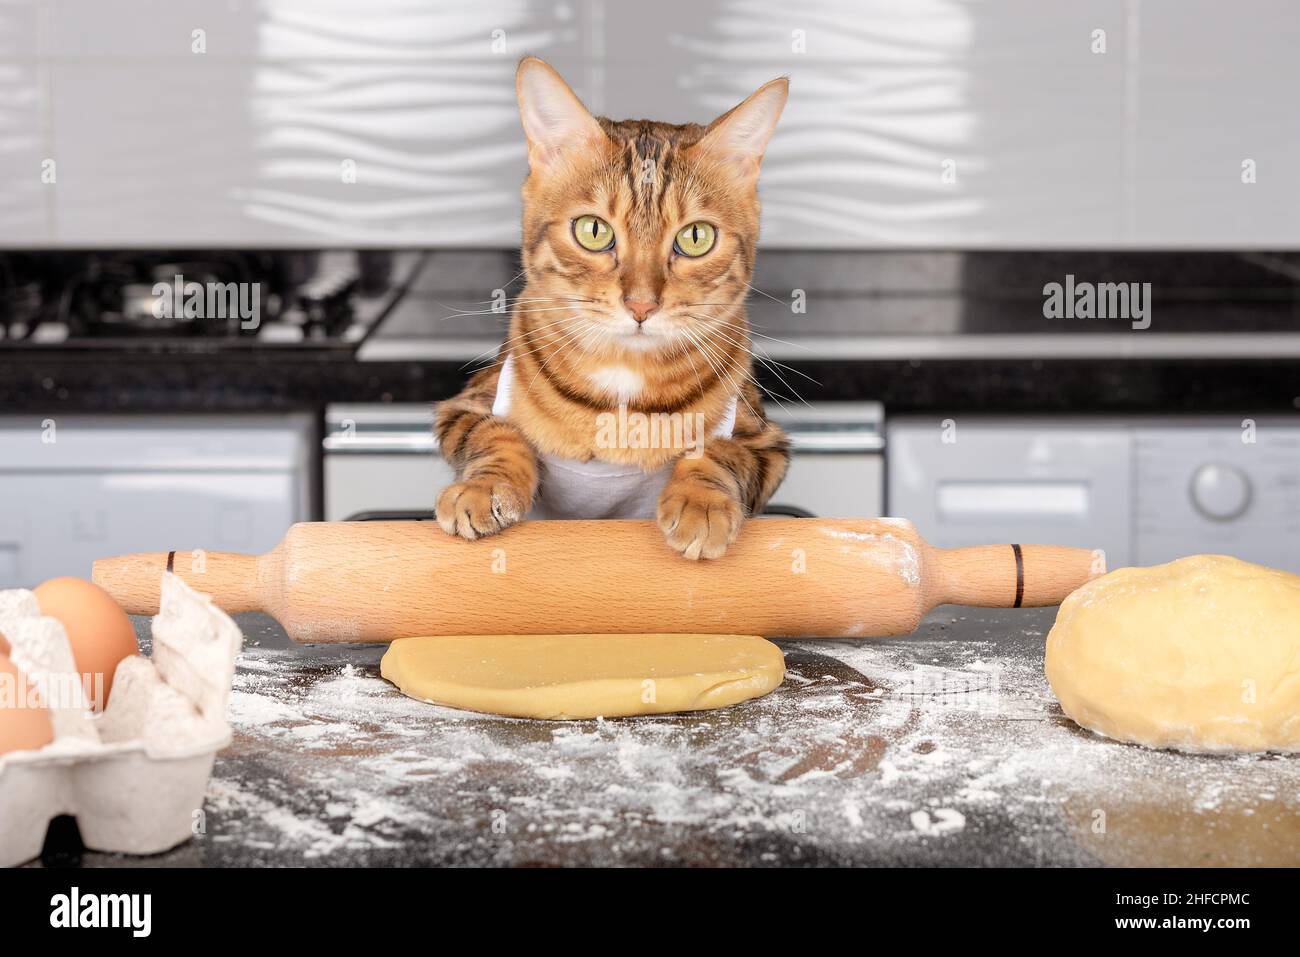 Portrait of a charming cat in an apron with a rolling pin for dough in its paws. Stock Photo